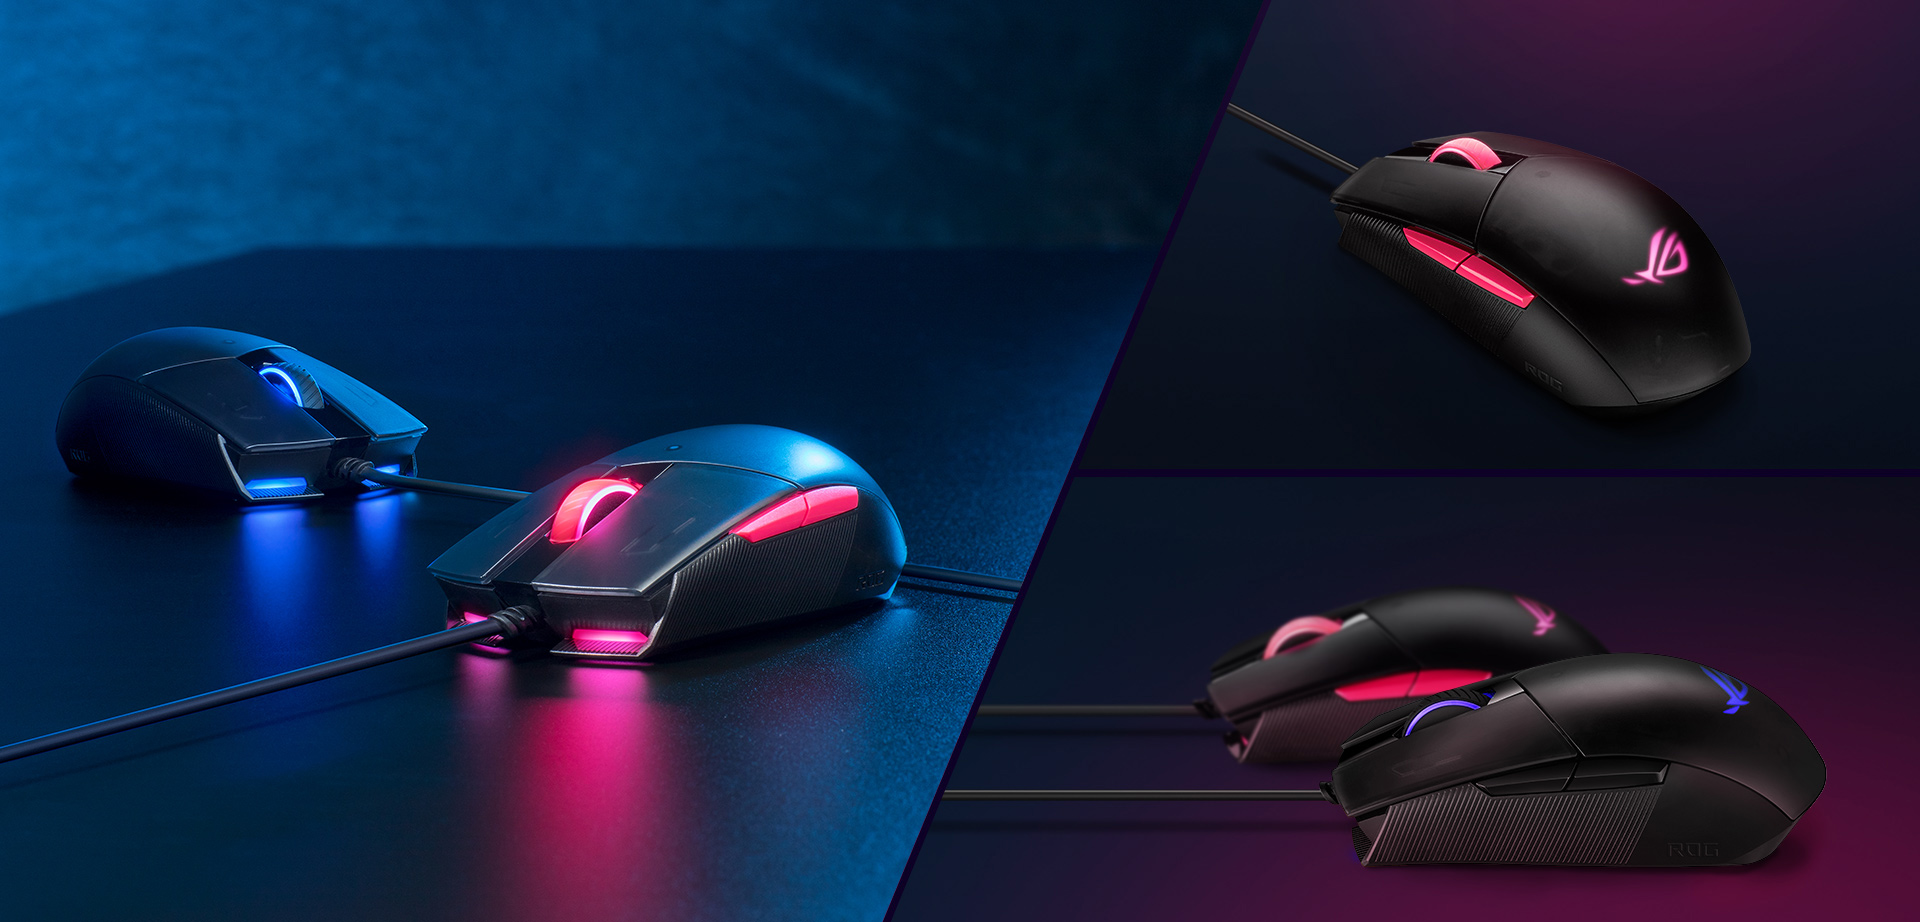 Images featuring both the ROG Impact II in its original color and in Electro Punk